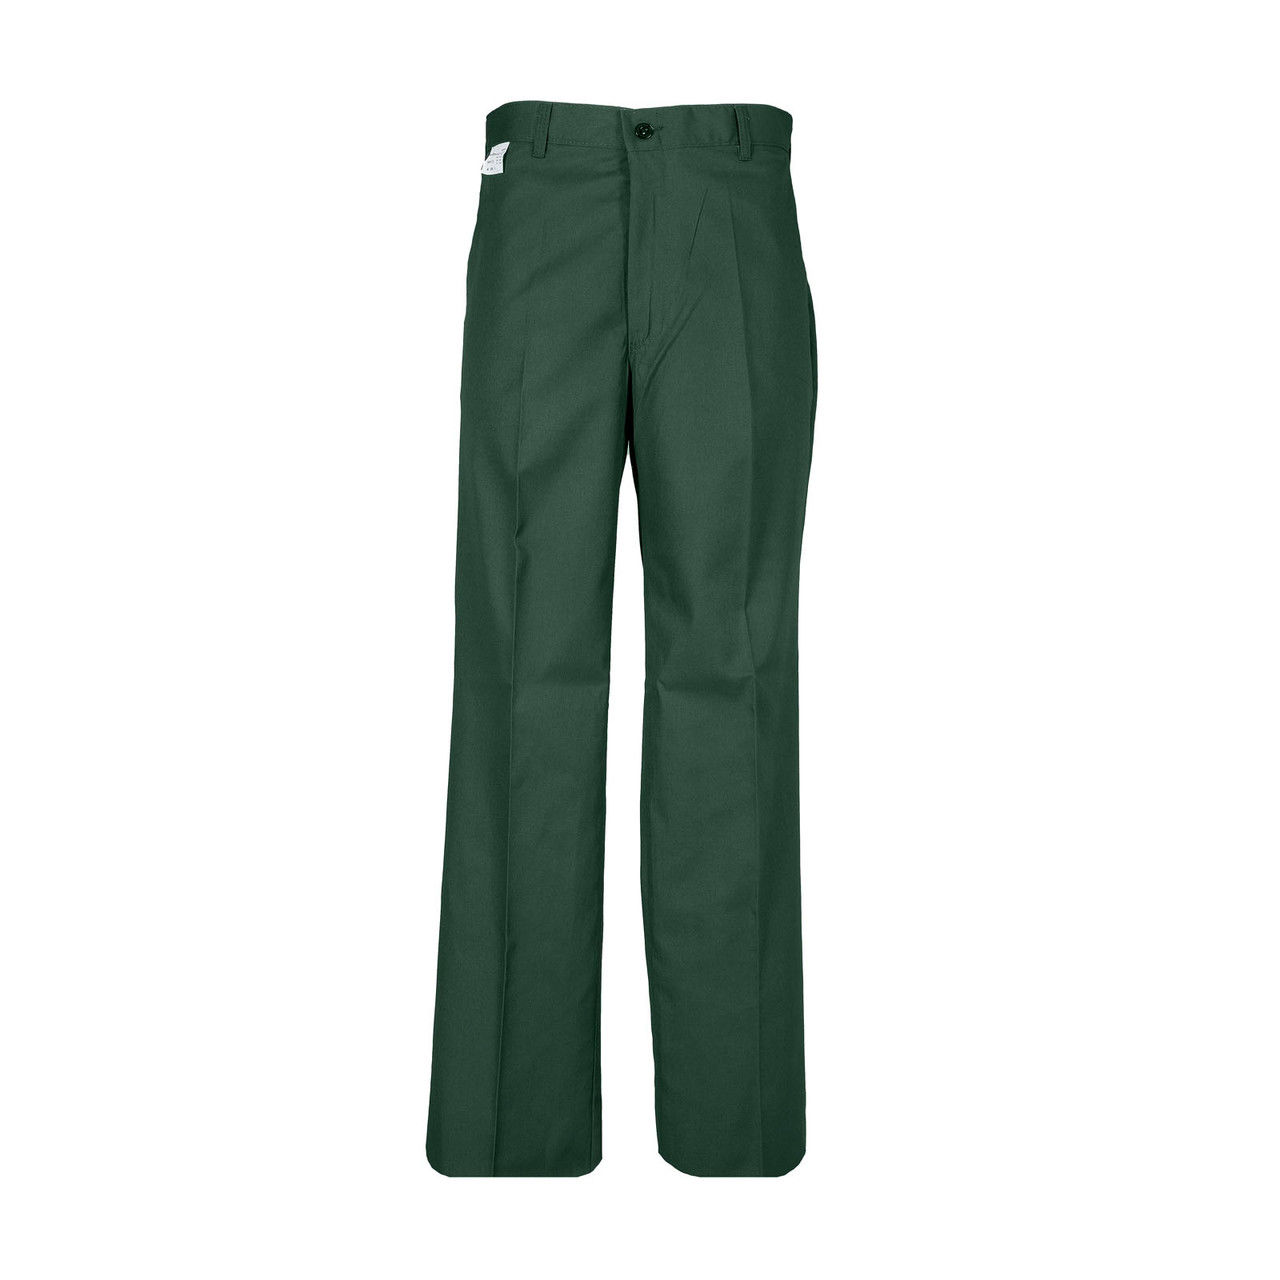 What is the description of the Spruce Green Industrial Work Pant?